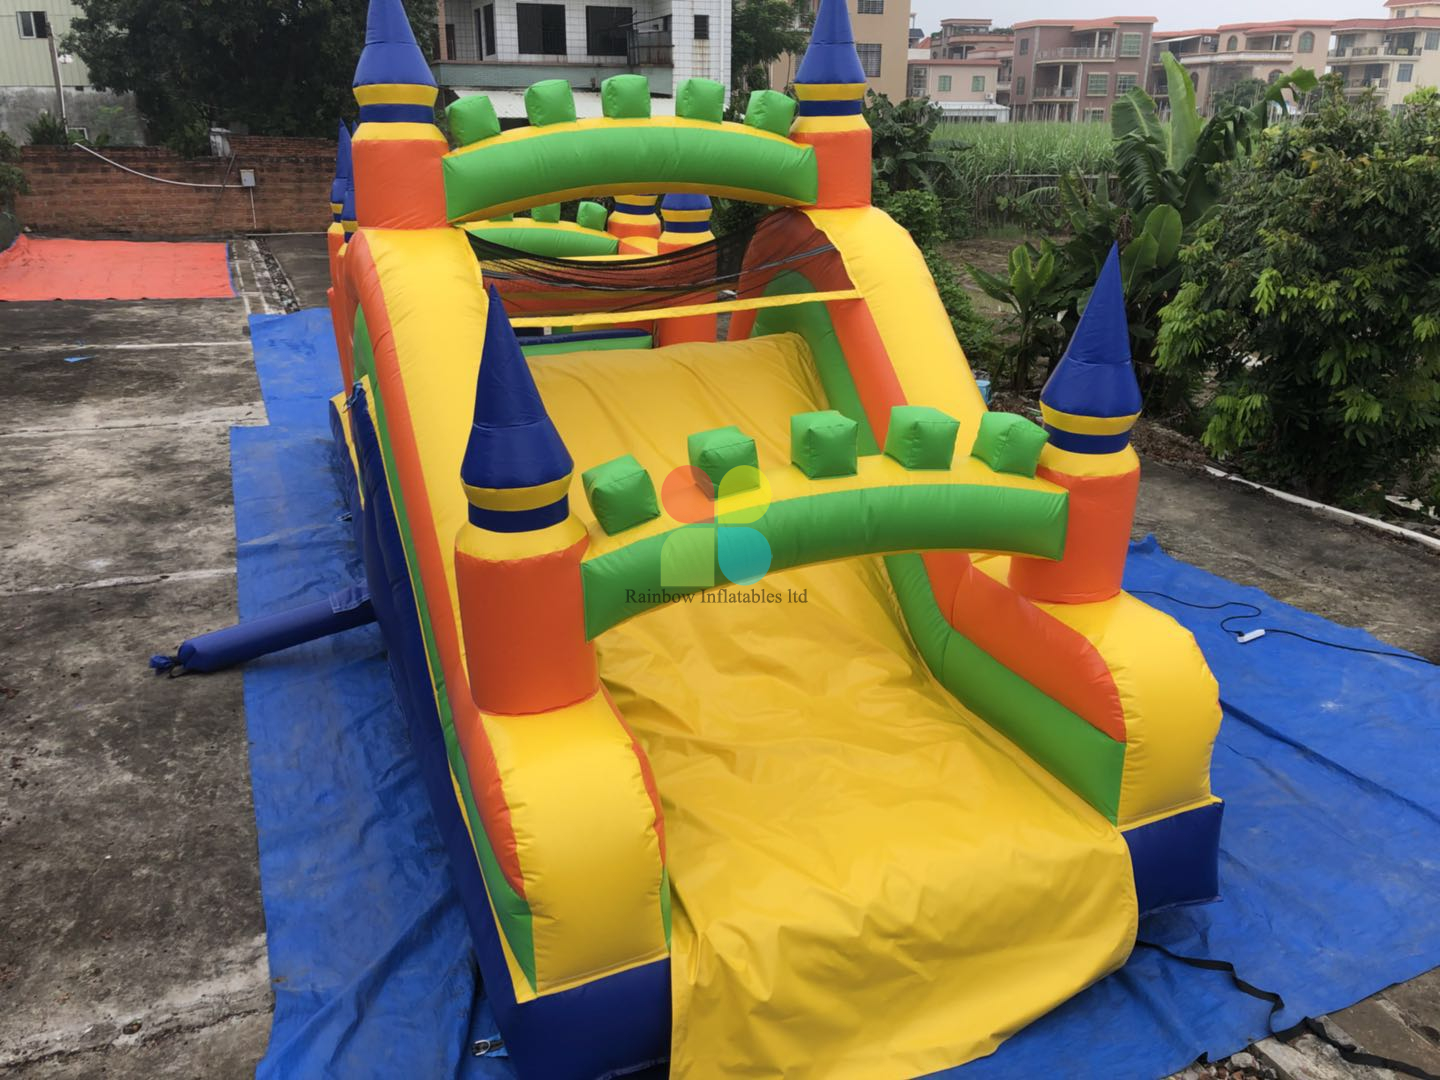 Large Customized Indoor Inflatable Obstacle Course for Kids And Adults